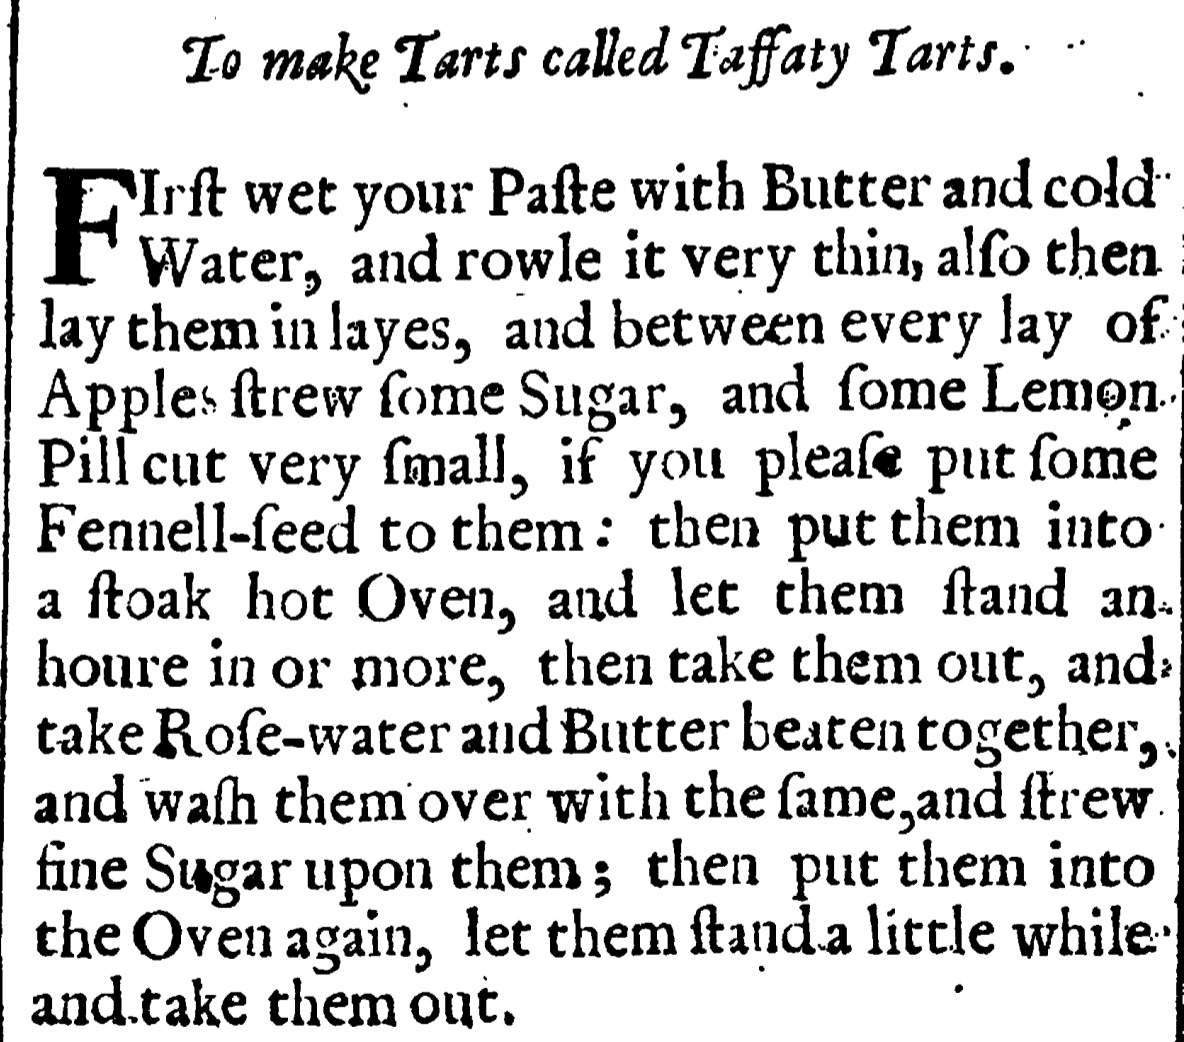 To make Tarts called Taffaty Tarts.  First wet your paste with Butter and Cold Water,  and rowle it very thin , alſo then lay them in layes, and between every lay of  Apples ſtrew fome Sugar, and ſome Lenion.  Pillcut very ſmall, if you pleaſe put ſome  Fennell-feed to them : then put them into  a ftoak hot Oven, and let them ſtand an  houre in or more, then take them out, and  take Roſe -water and Butter beaten together,  and waſh them over with the ſame, and ſtrew  fine Sugar upon them ; then put them into  the Oven again, let them ſtand a little while.  and.take them out.